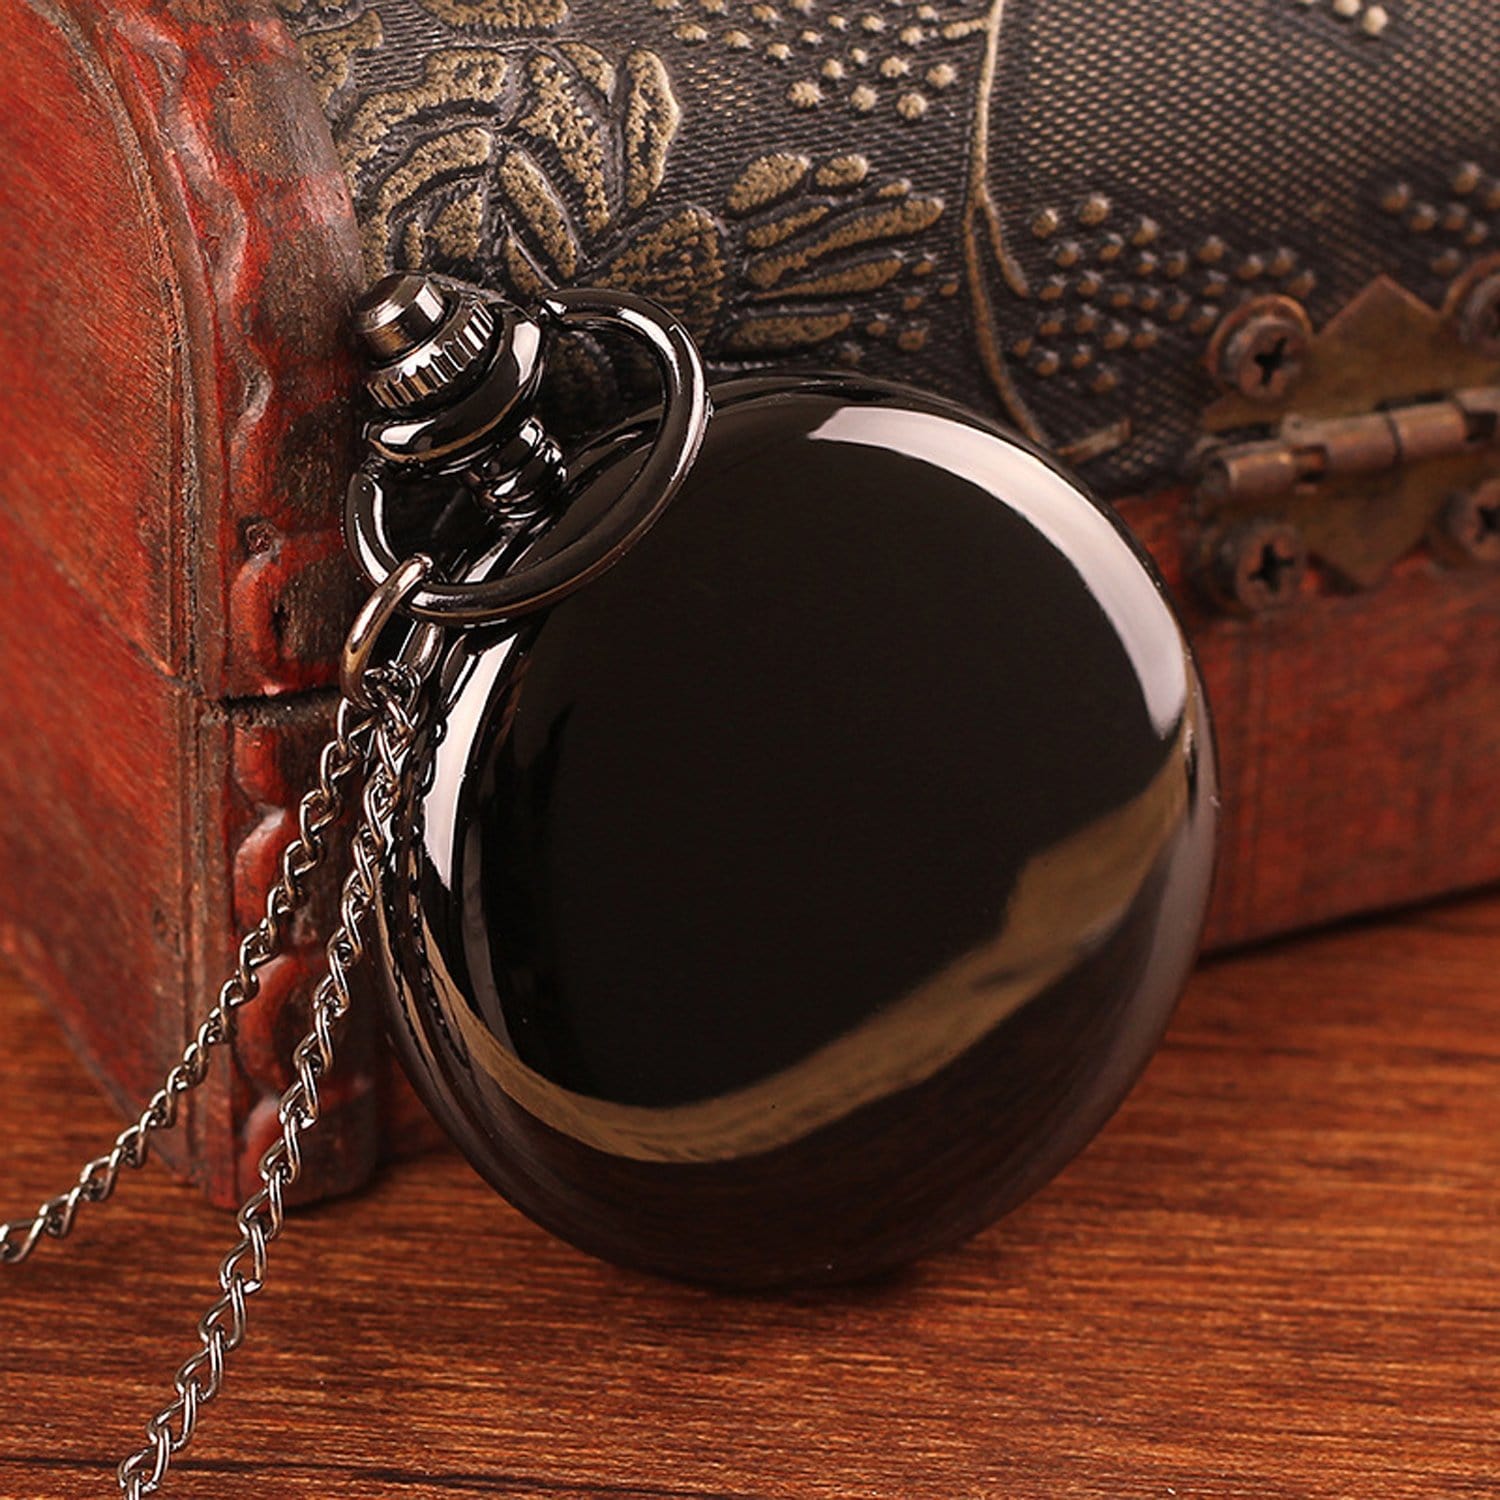 Pocket Watches To Our Son - Never Forget Your Way Back Home Pocket Watch GiveMe-Gifts